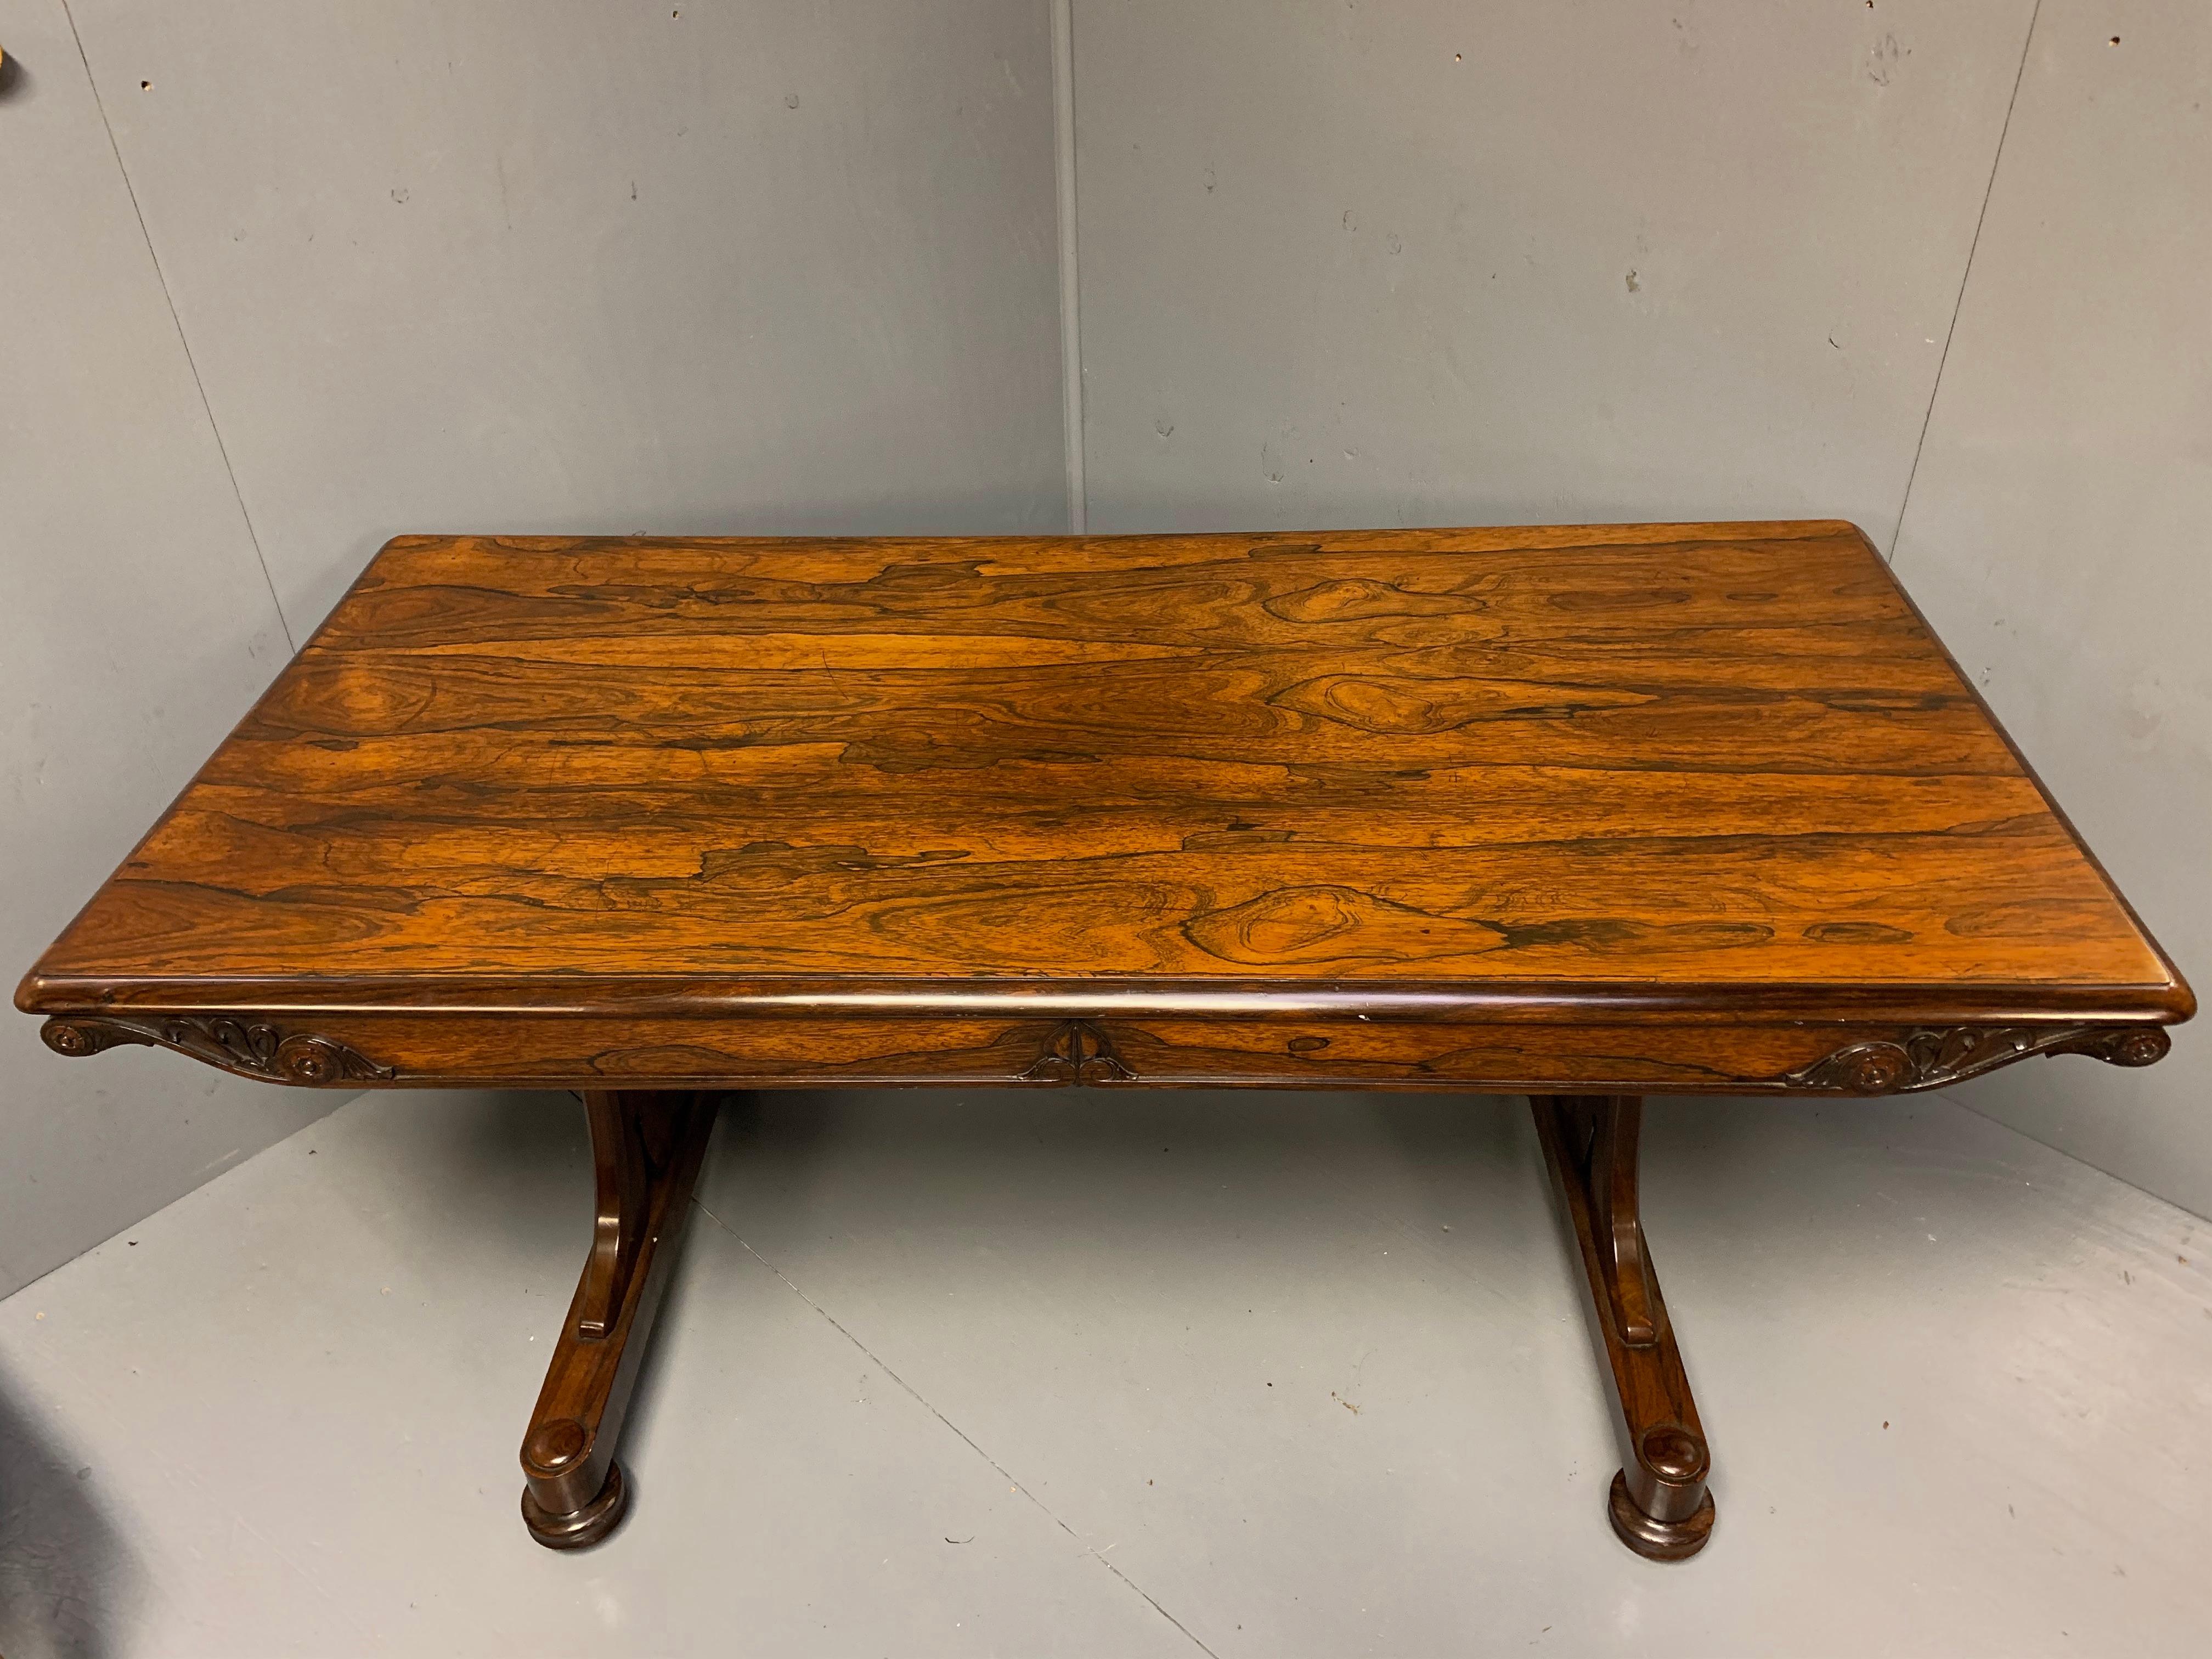 Very fine quality early 19th century Regency rosewood library table, centre or sofa table circa 1820 and in super condition.
Although this is a large piece, it really is very elegant table with its slim top and typical scrolling columns to the